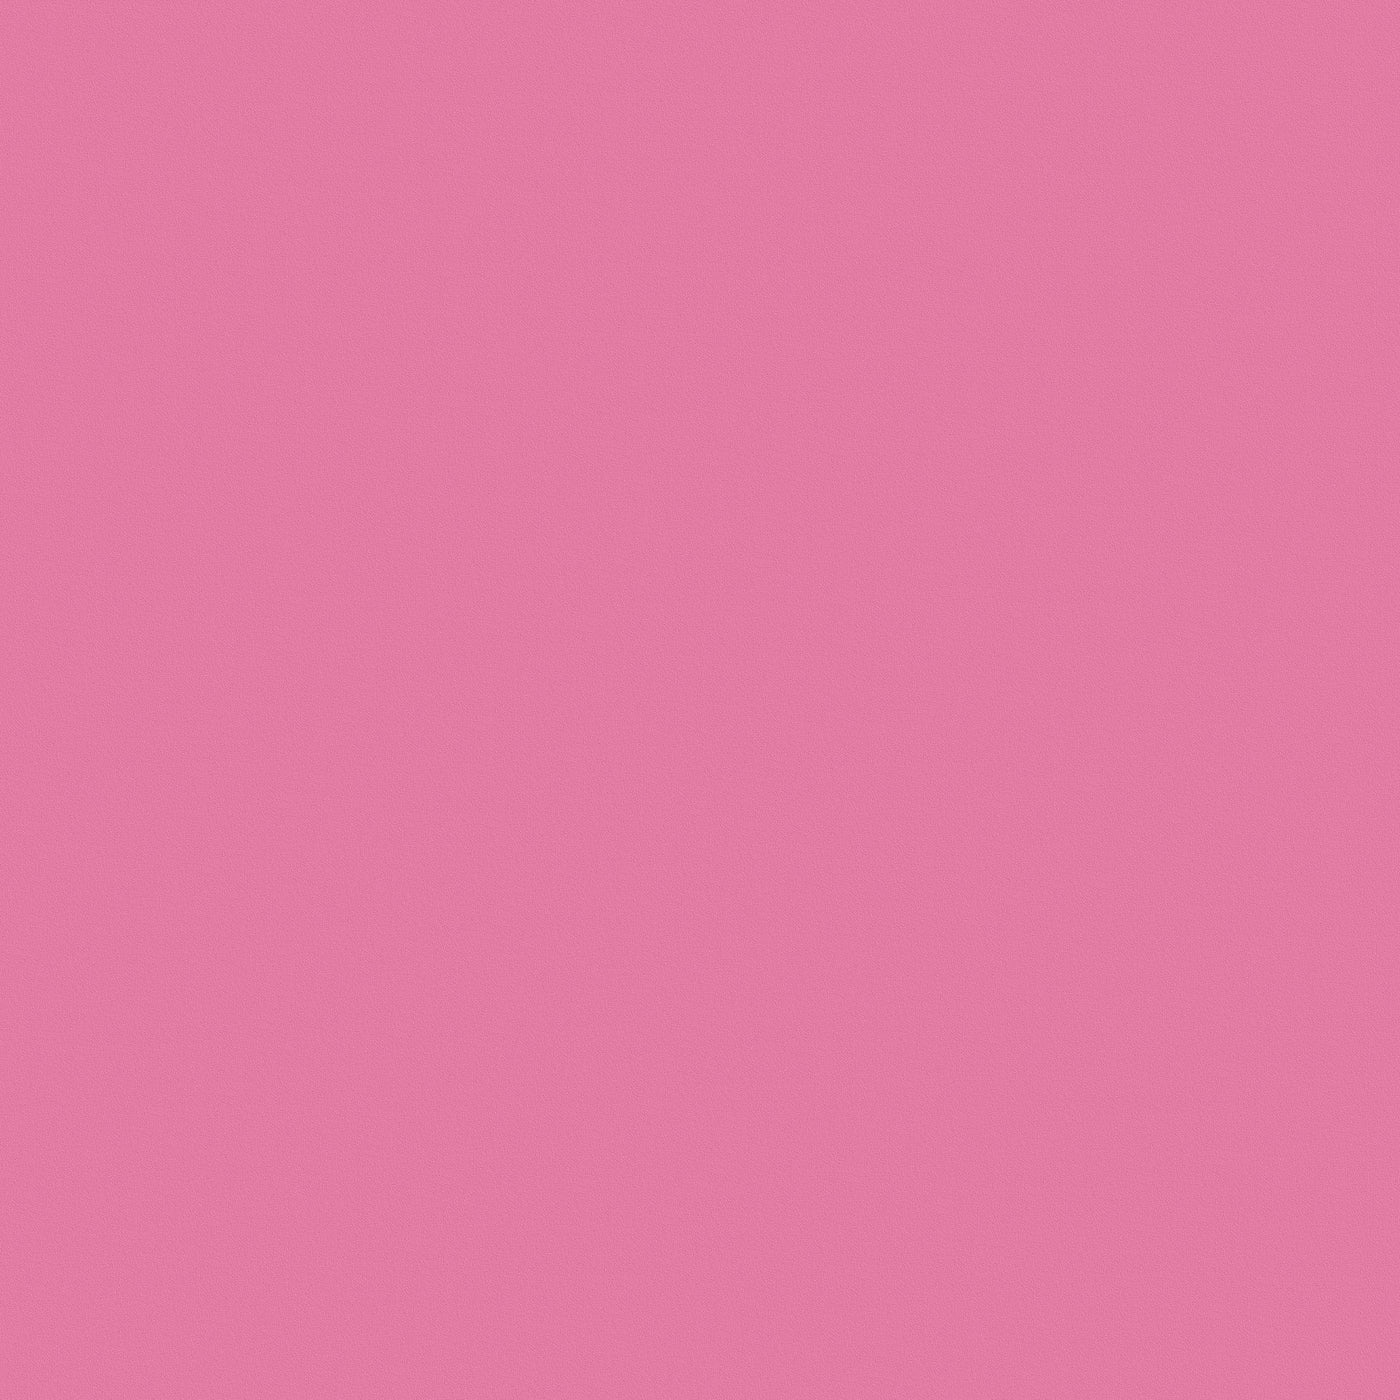 BUBBLEGUM - deep pink 12x12 smooth cardstock that cuts great - Lessebo Paper